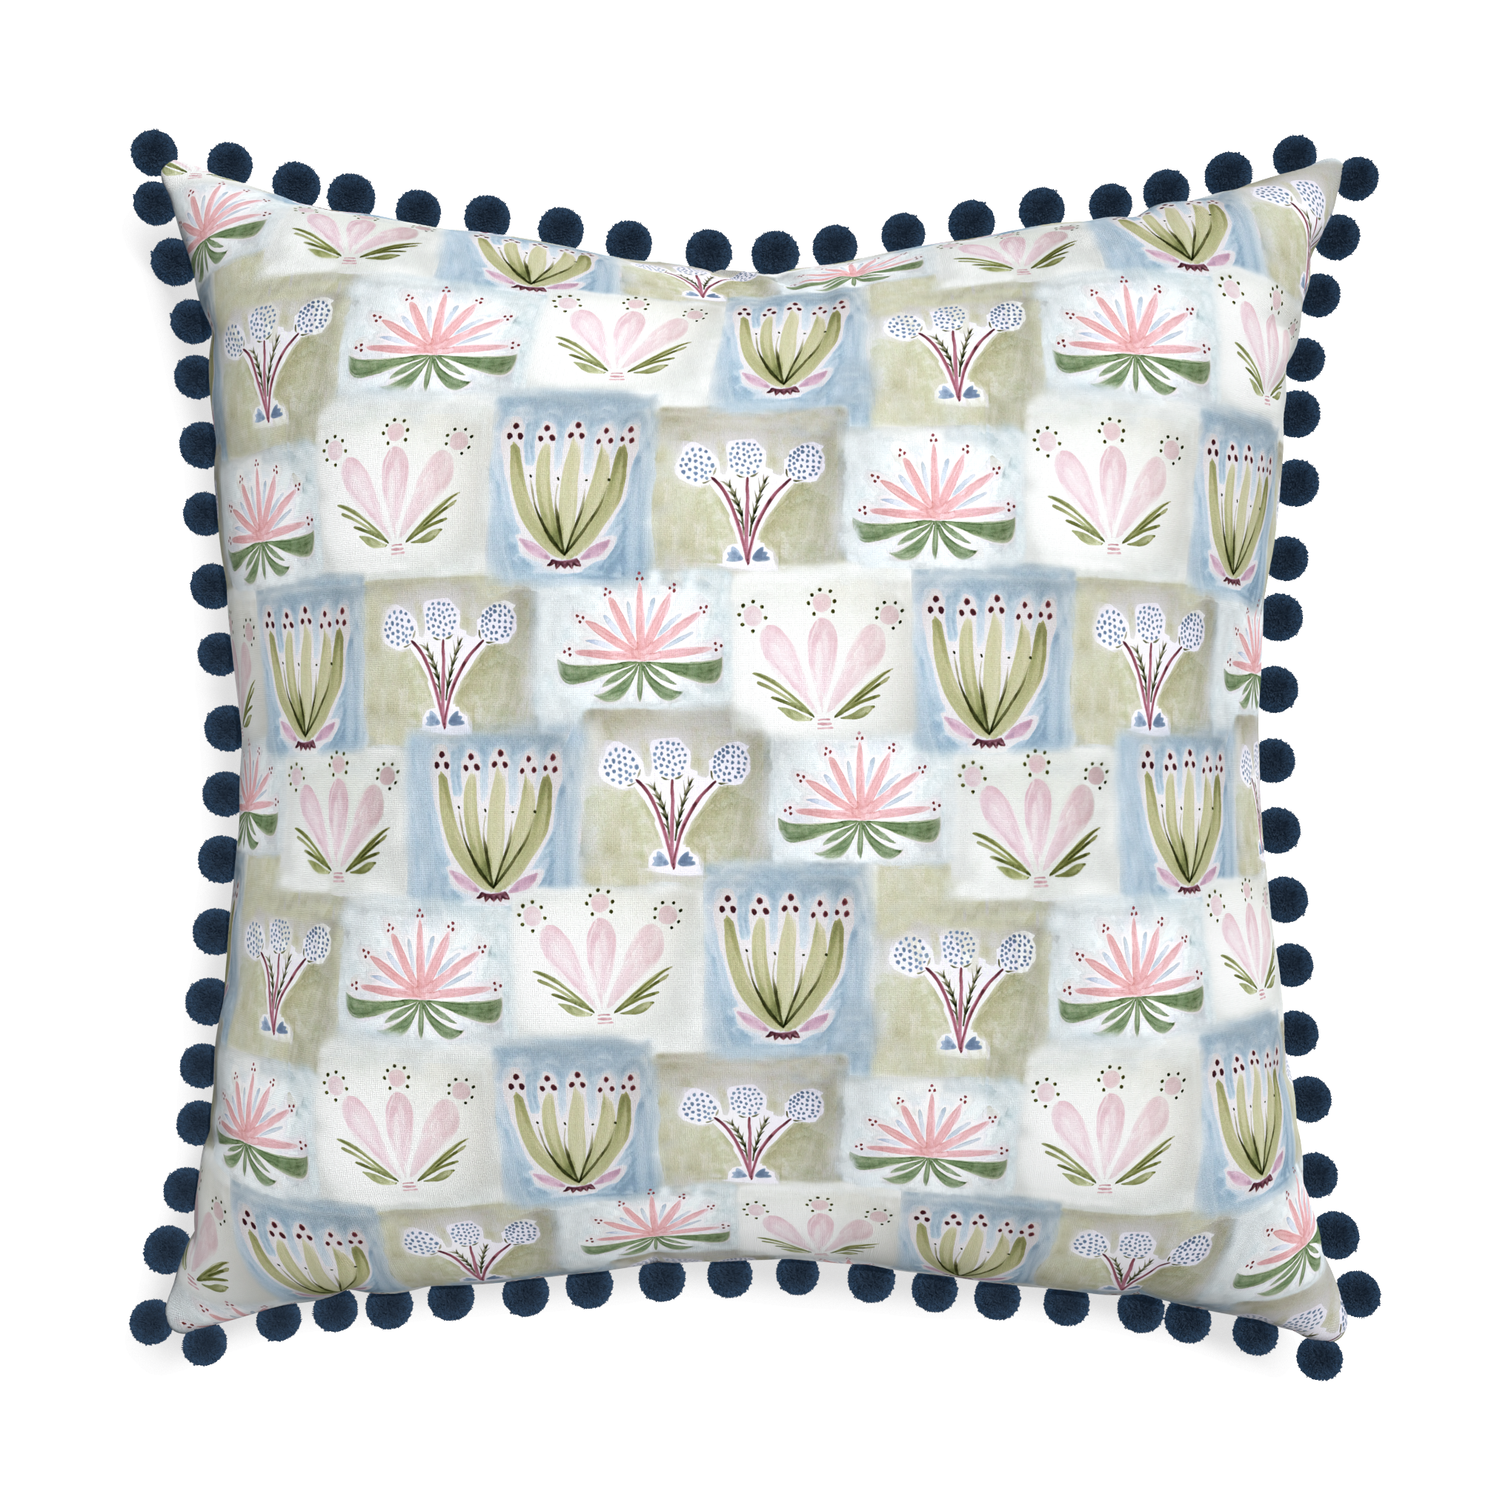 Euro-sham harper custom hand-painted floralpillow with c on white background